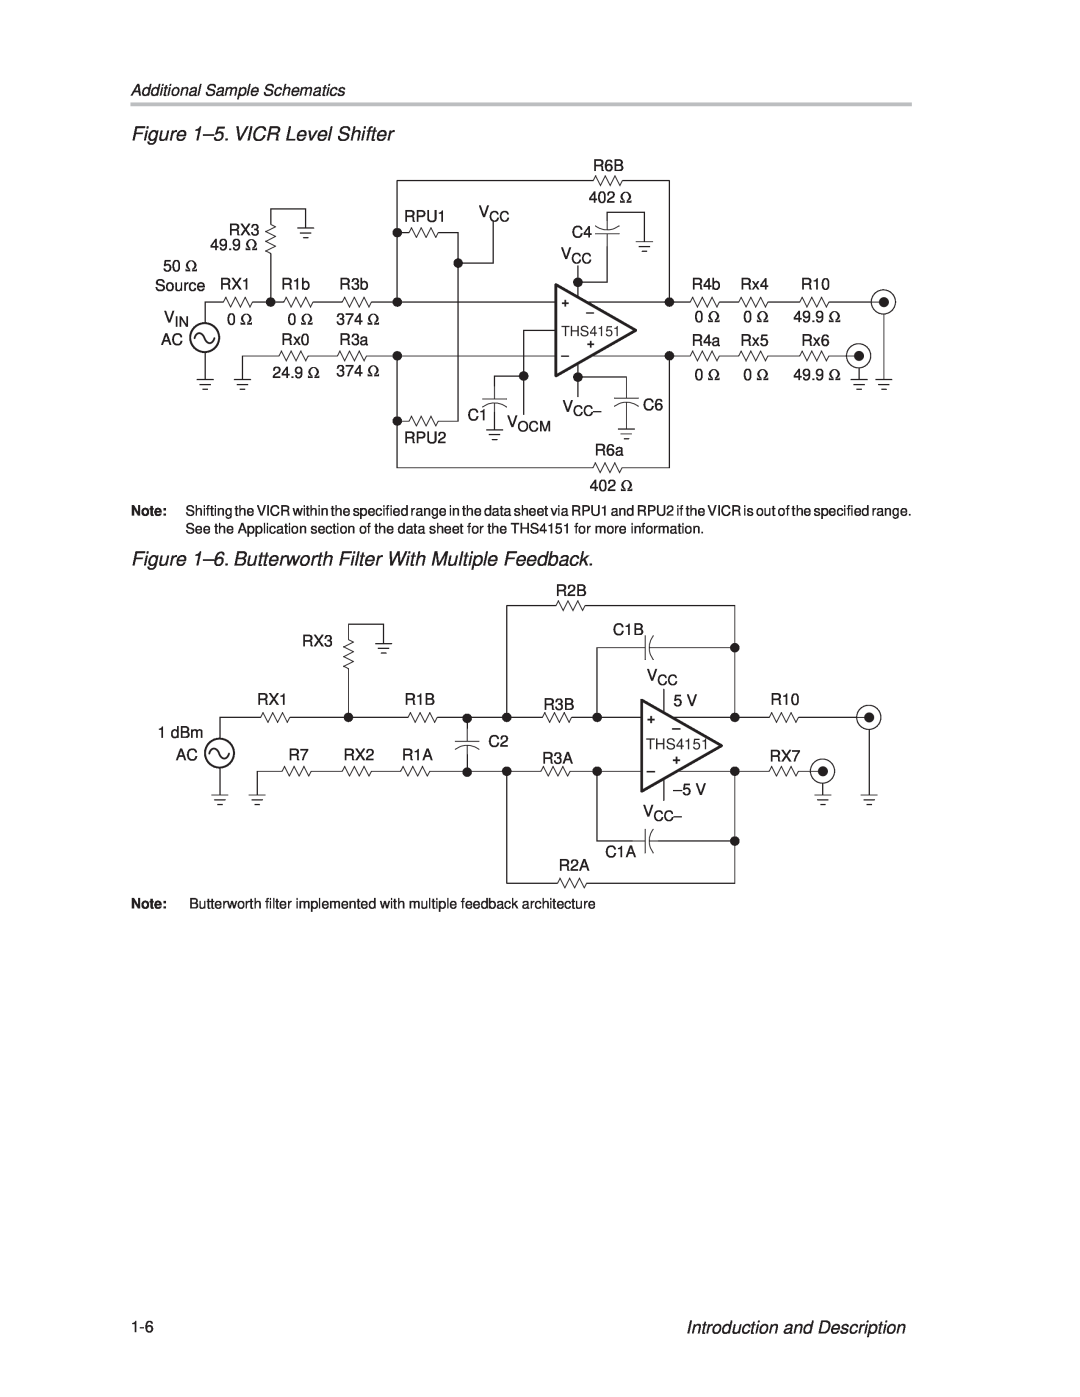 Texas Instruments THS4151 manual ±5. VICR Level Shifter, Introduction and Description, Additional Sample Schematics 